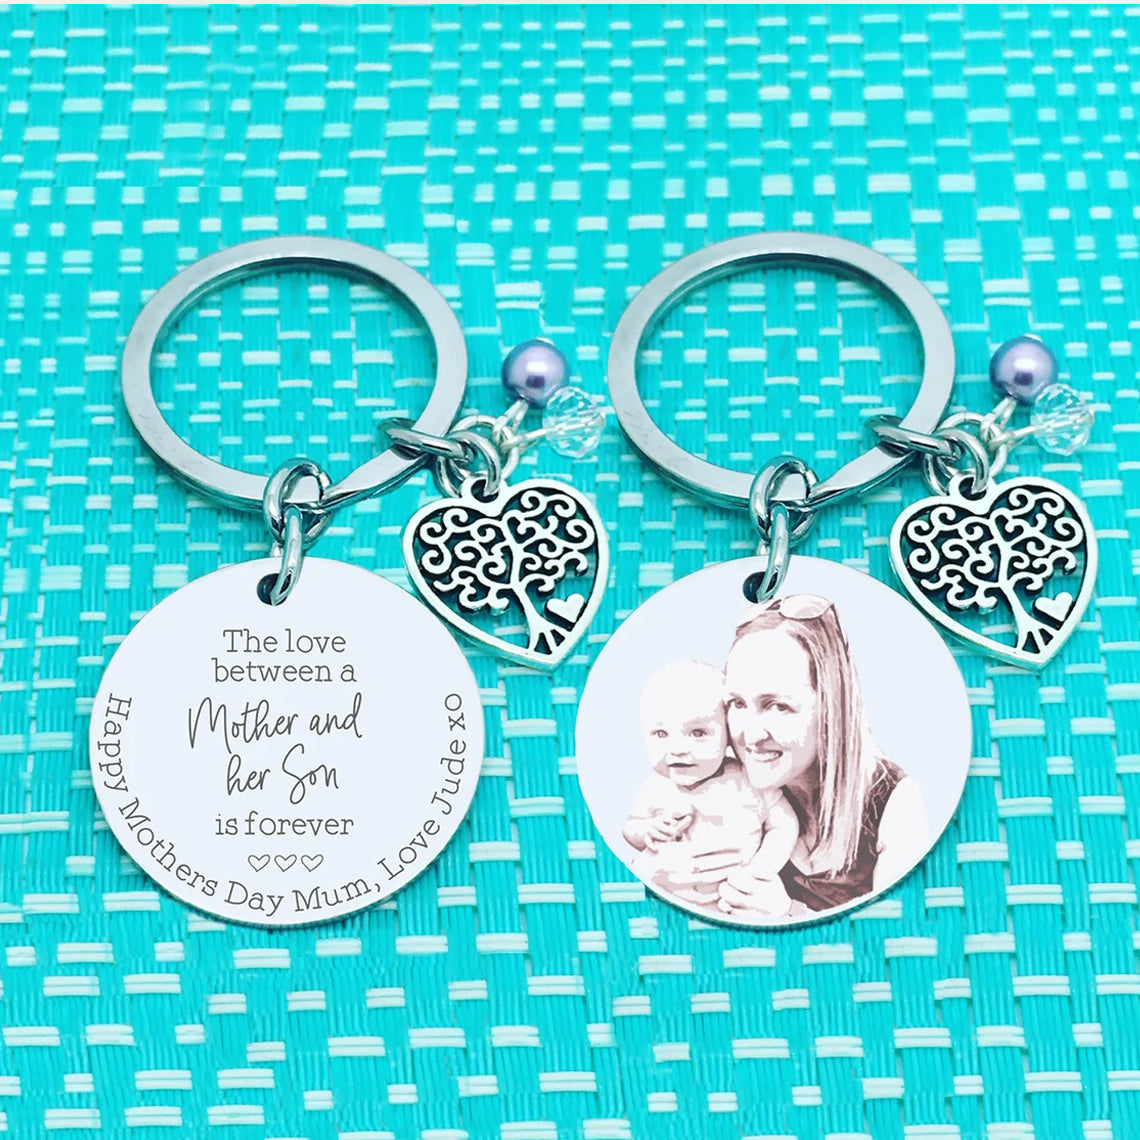 The Love Between a Mother and Son is forever, Engraved Photograph Keyring, Mothers Day Gifts, Mothers day present, mothers day presents, gift for grandparent, engraved gifts, personalised mothers day gift, gift from grandson, gift from grandaughter